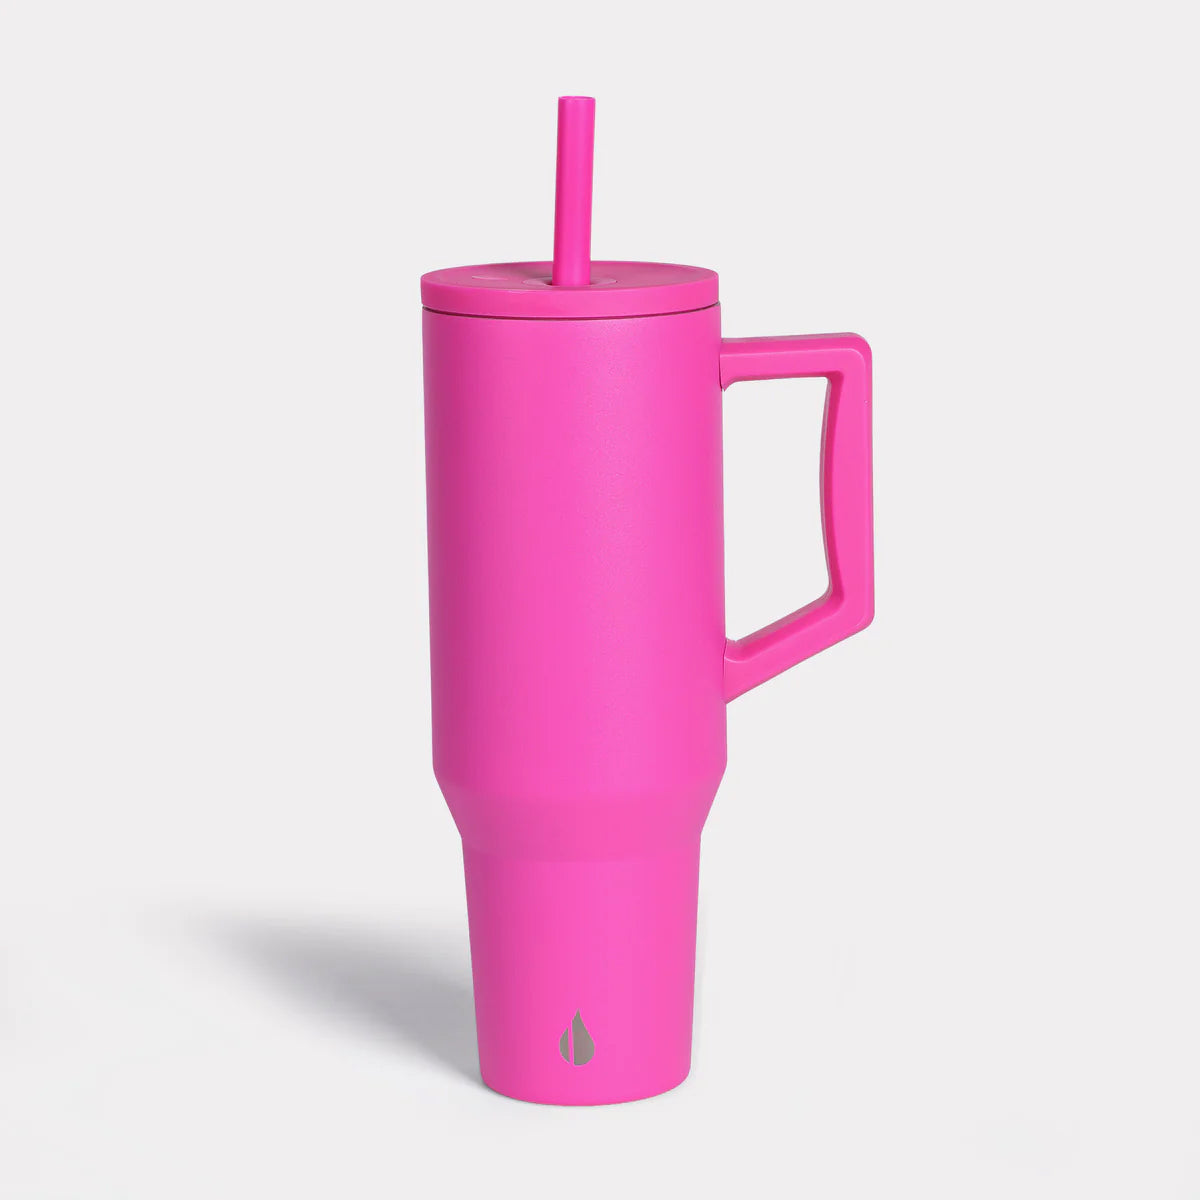 Customized Elemental 40 oz stainless steel tumbler with interchangeable straws in hot pink.